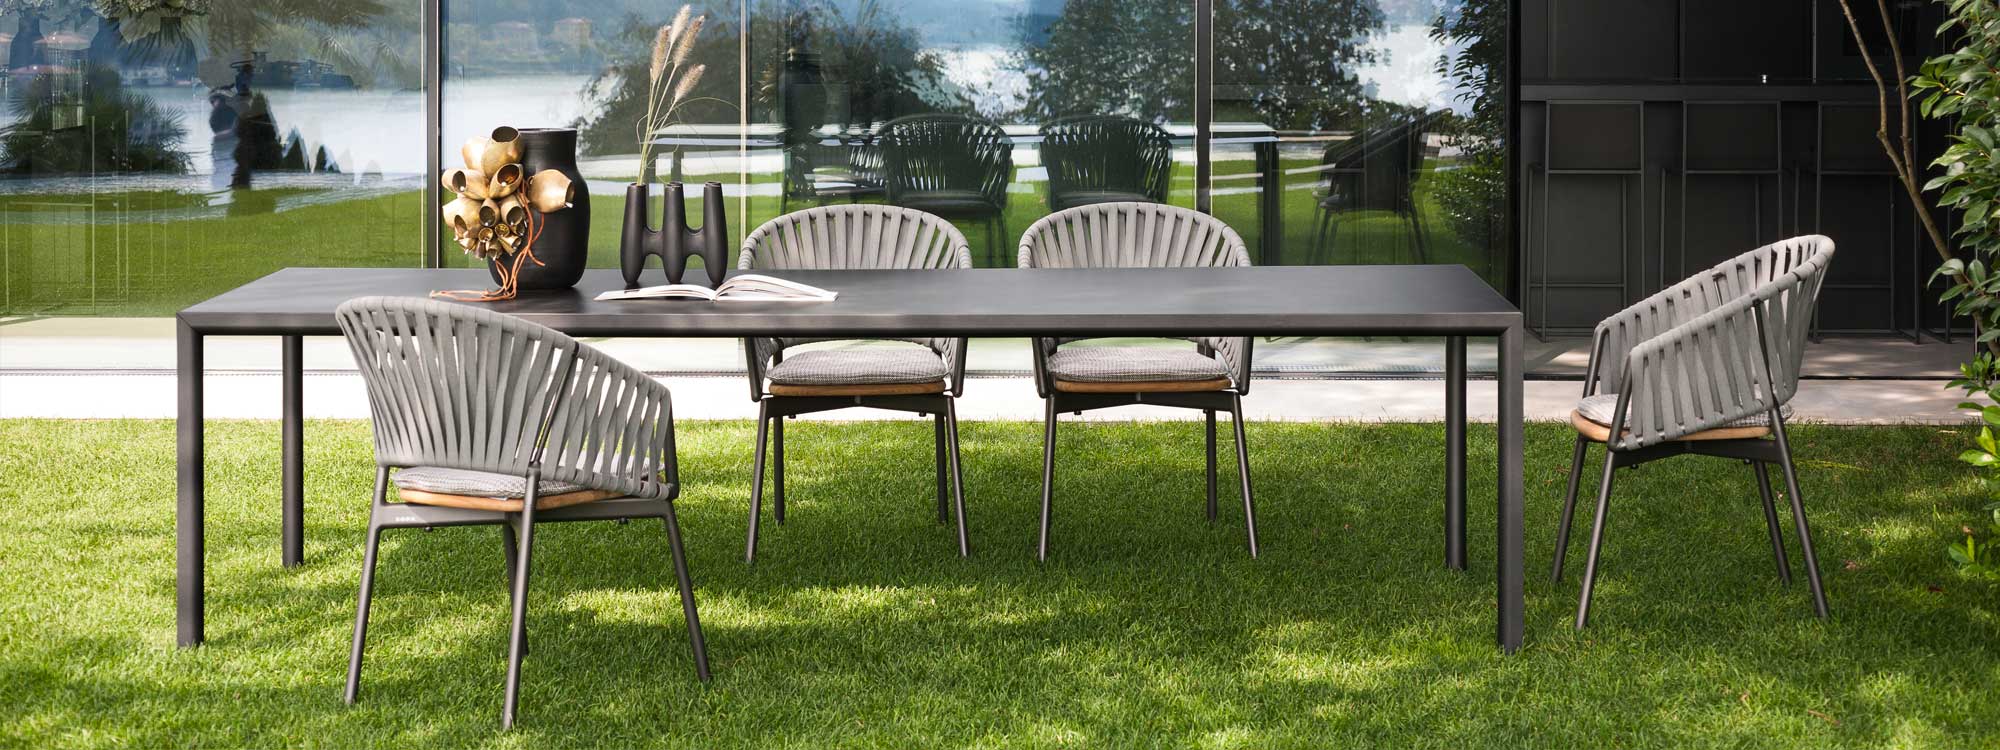 Image of RODA Plein Air large rectangular garden table with Piper chairs on lawn